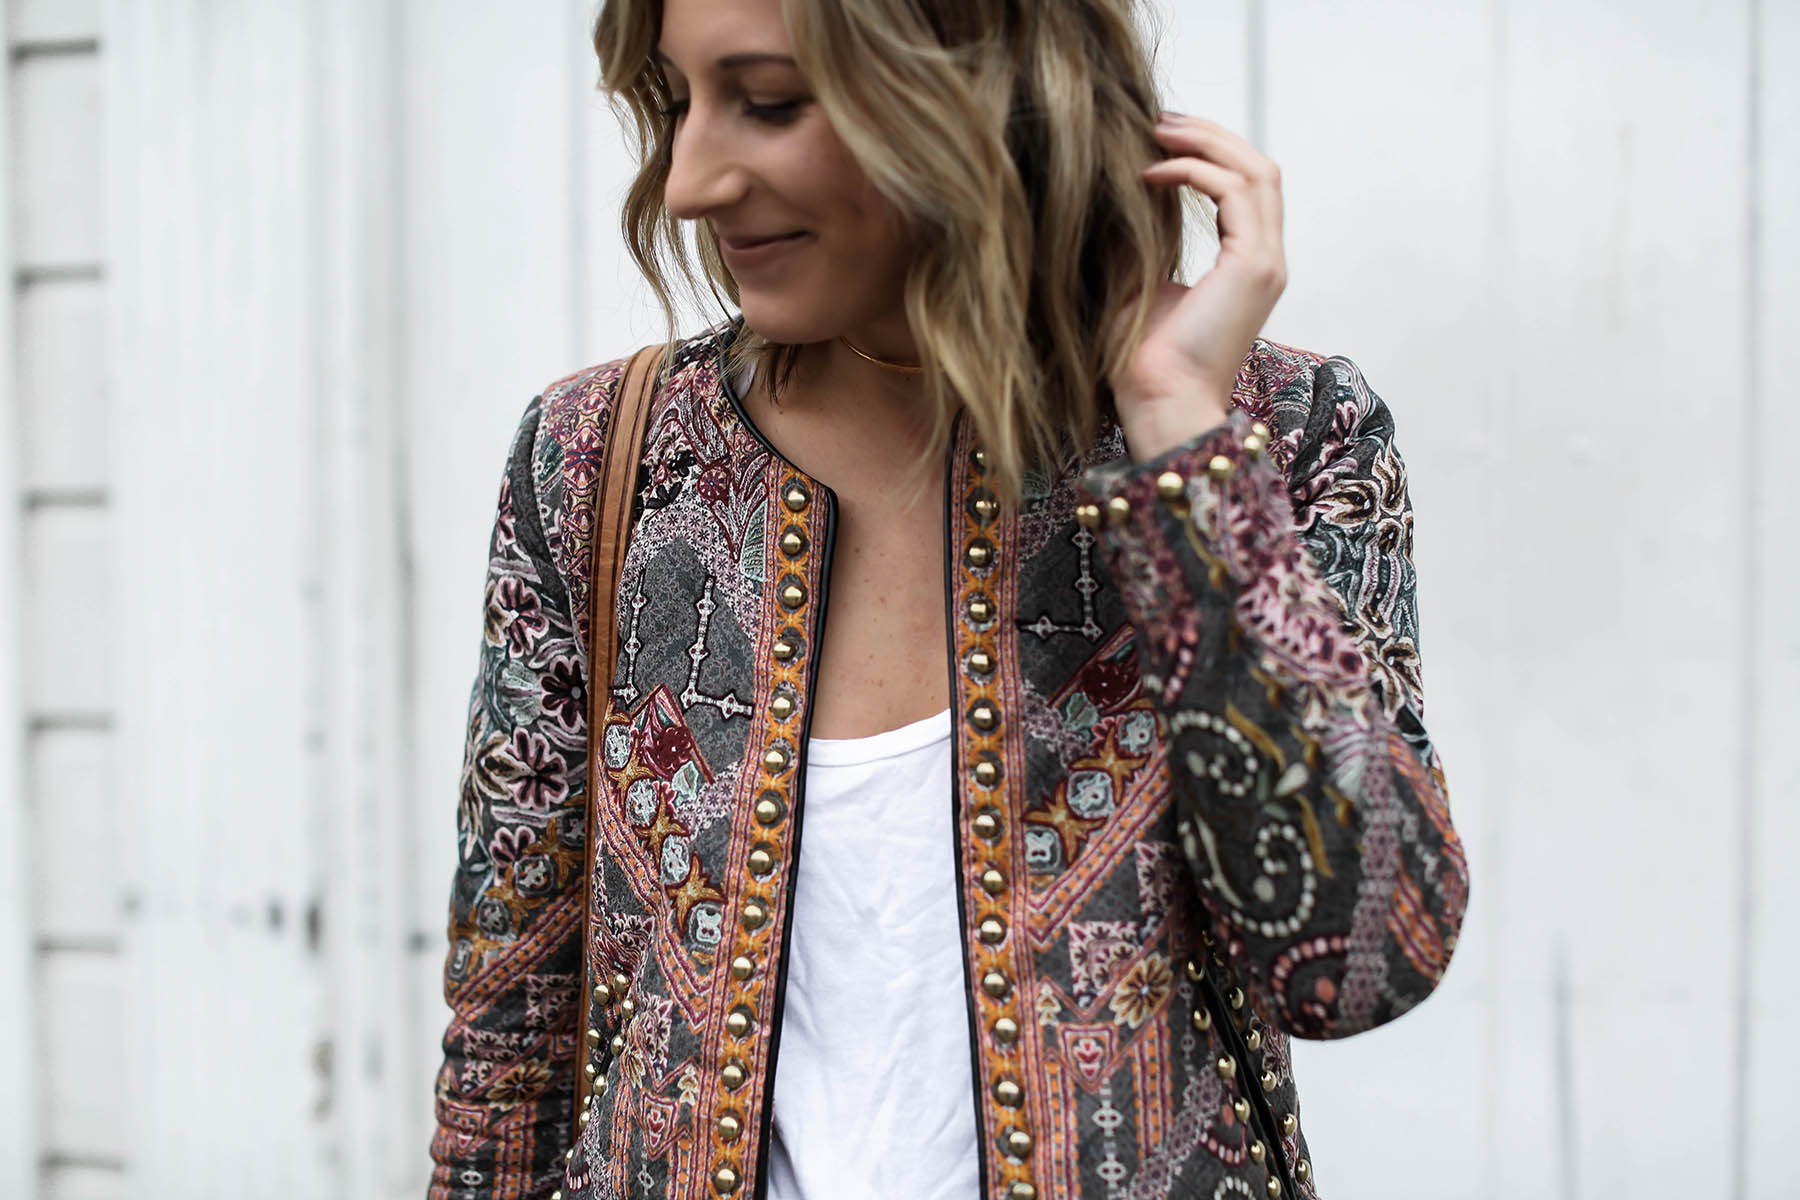 Why You Need a Statement Jacket